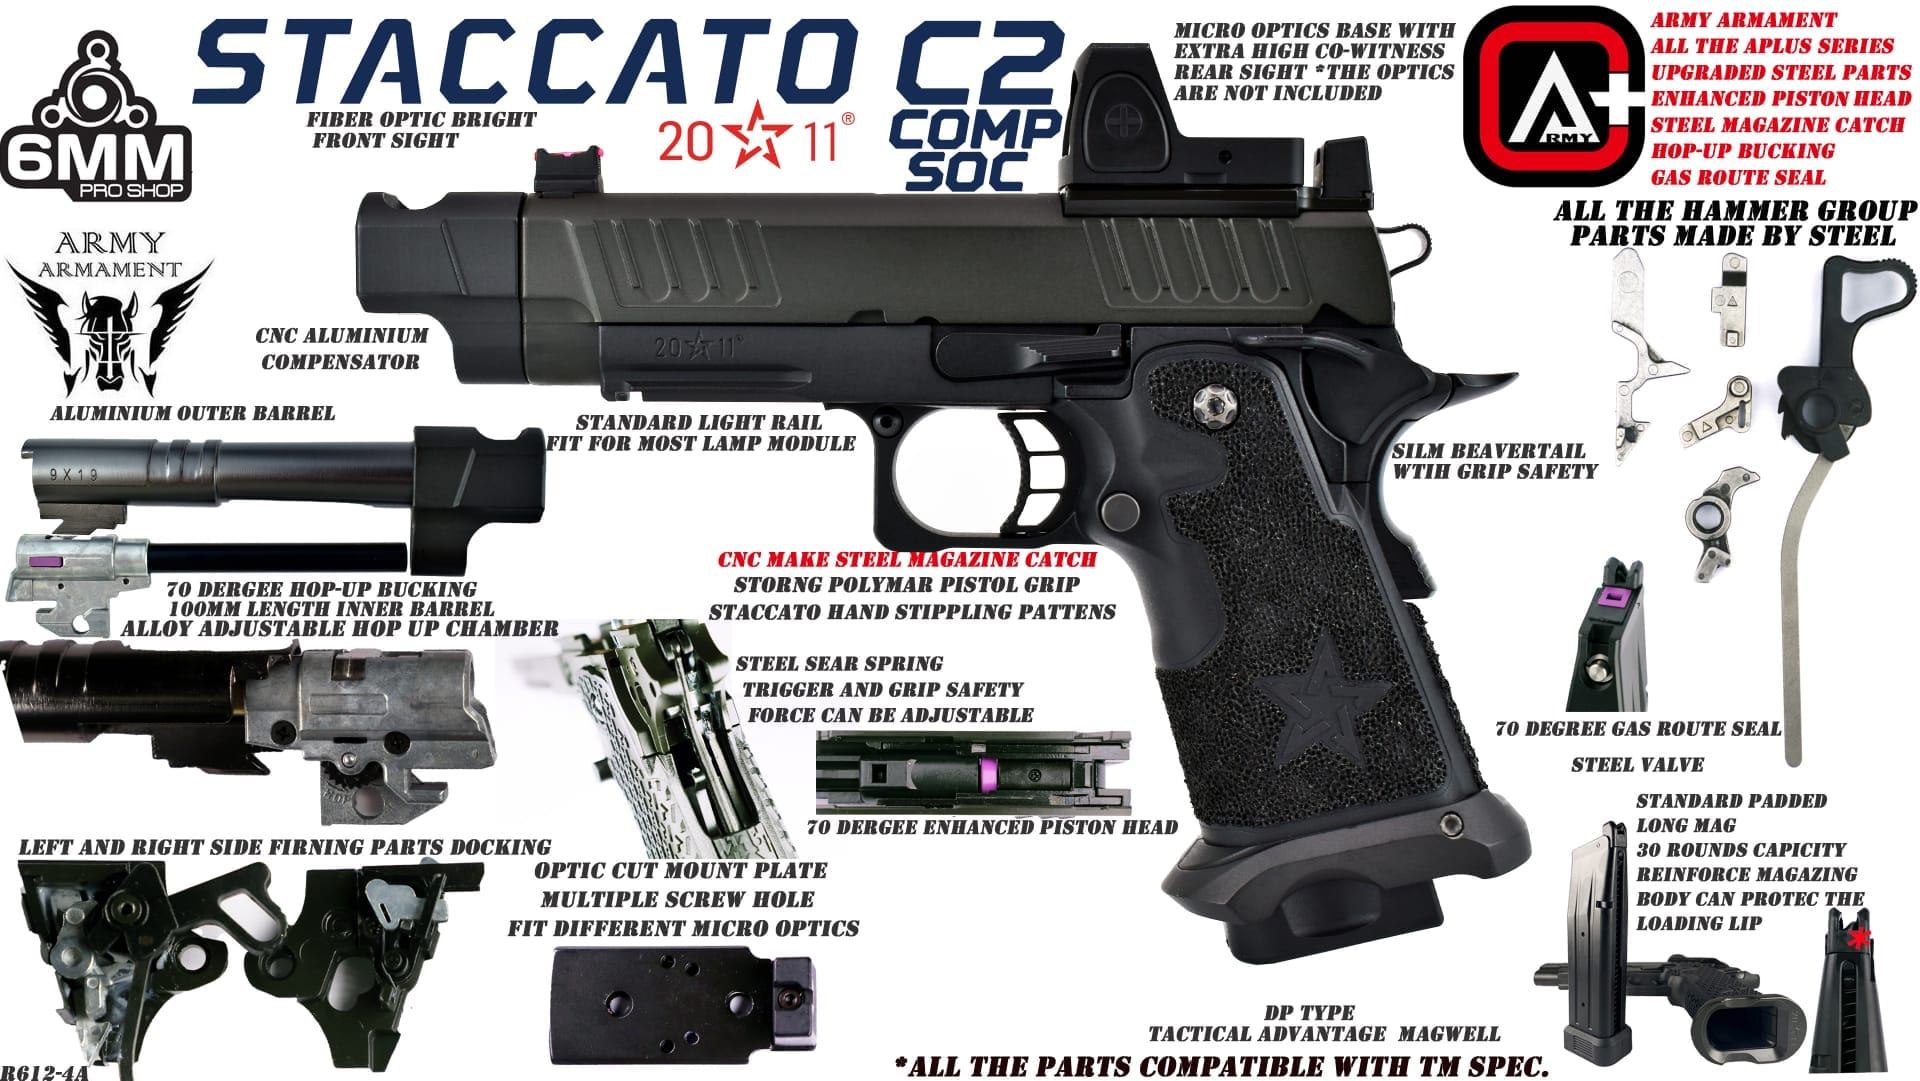 Army Armament Staccato C2 CompSoc